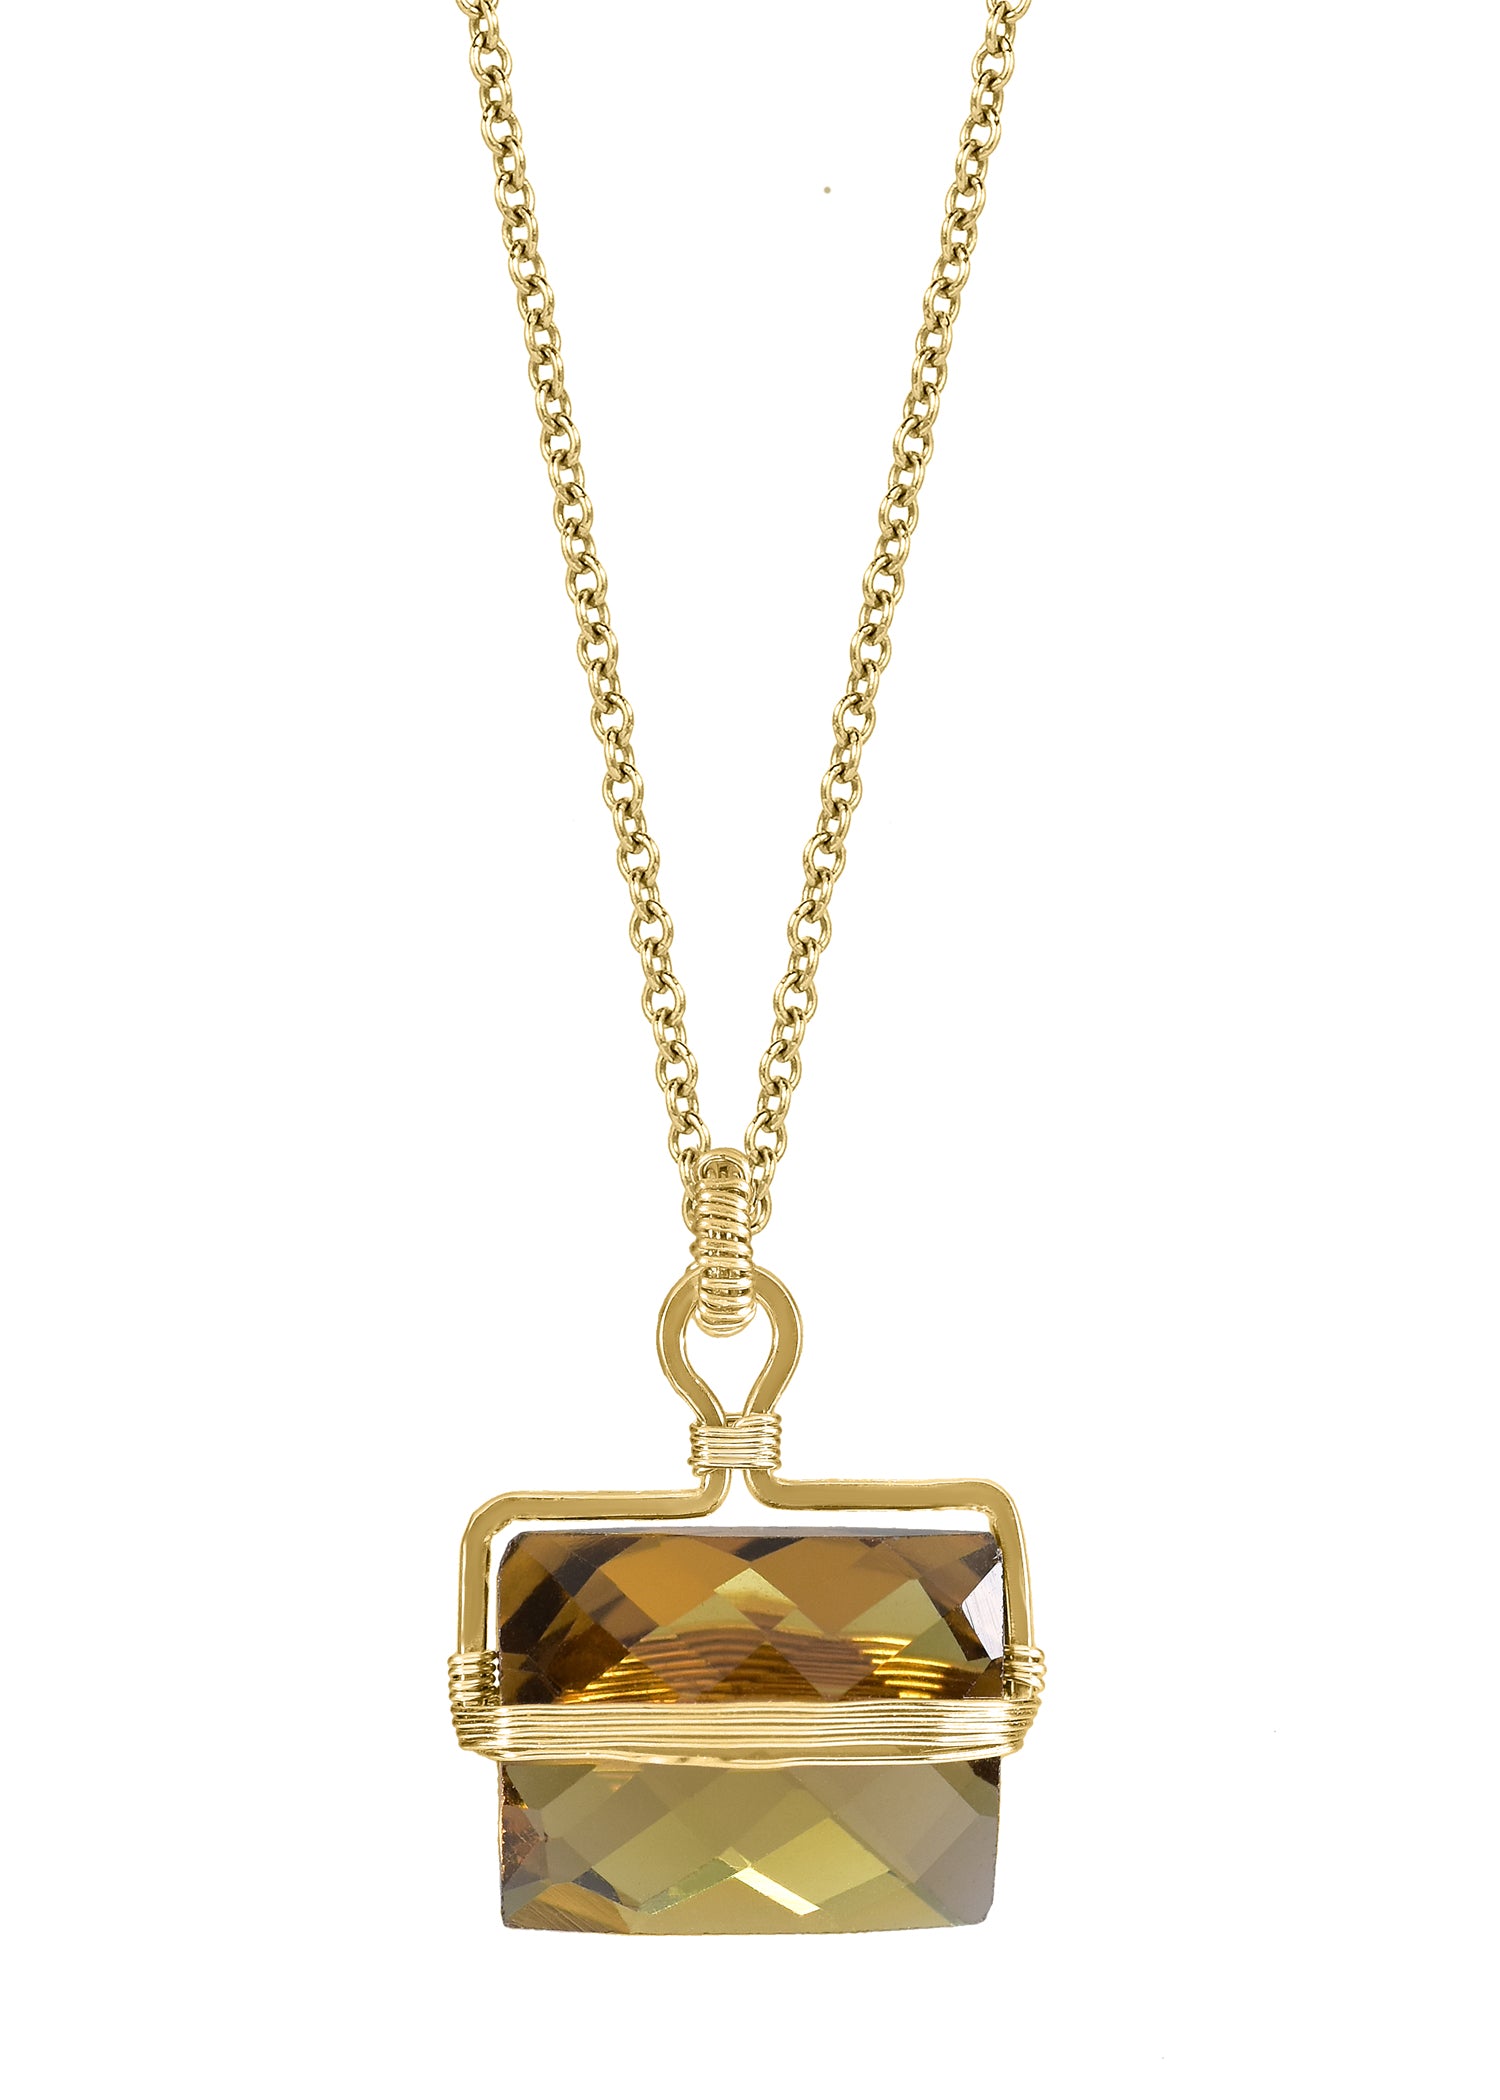 Whiskey quartz 14k gold fill Necklace measures 16" in length Pendant measures 5/8" in length and 9/16" in width Handmade in our Los Angeles studio